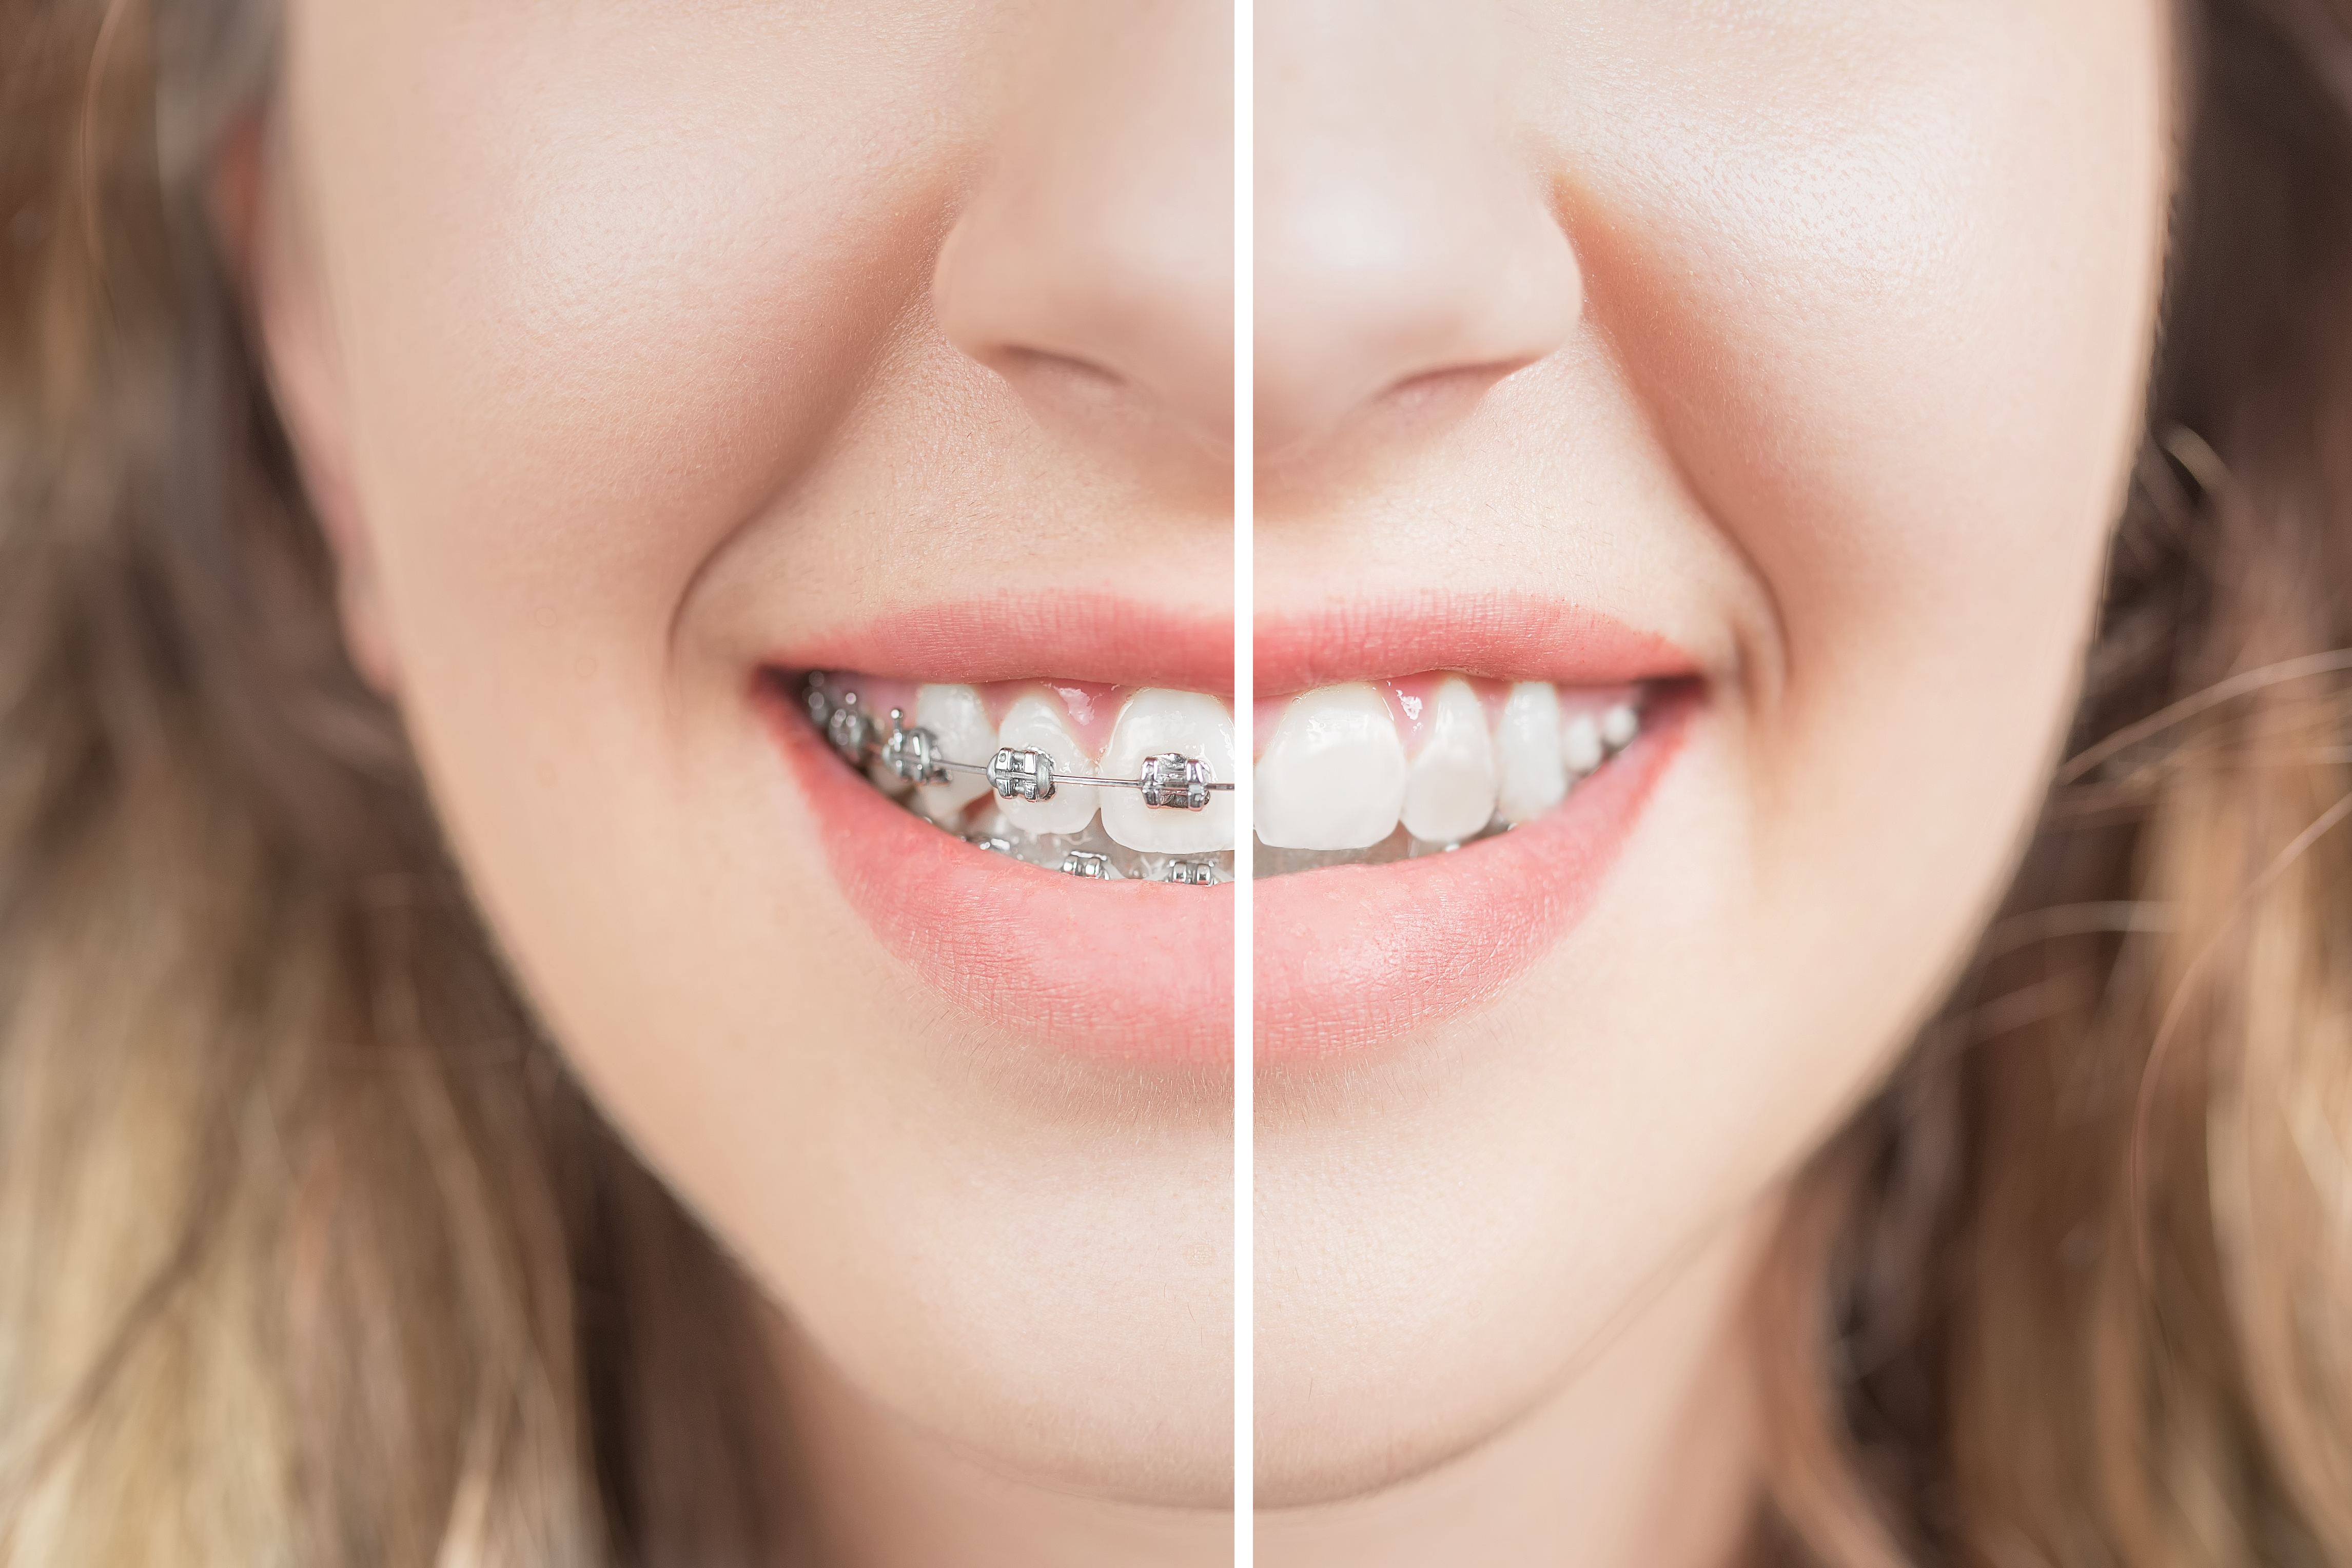 Orthodontics before and after braces